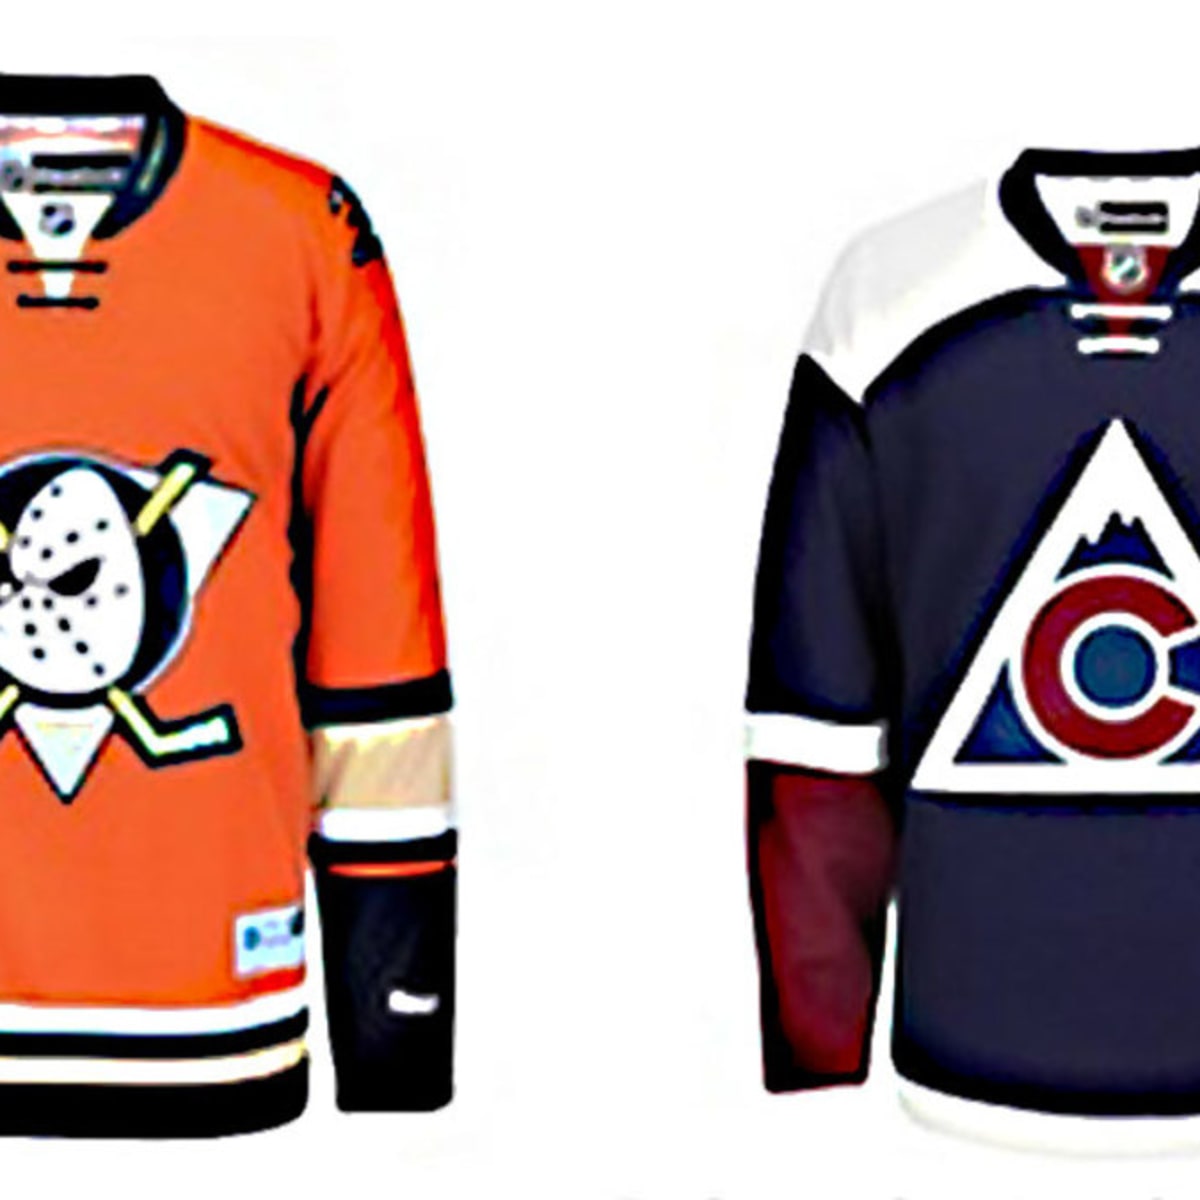 Anaheim Set To Bring Back The Mighty Ducks With These New Third Jerseys